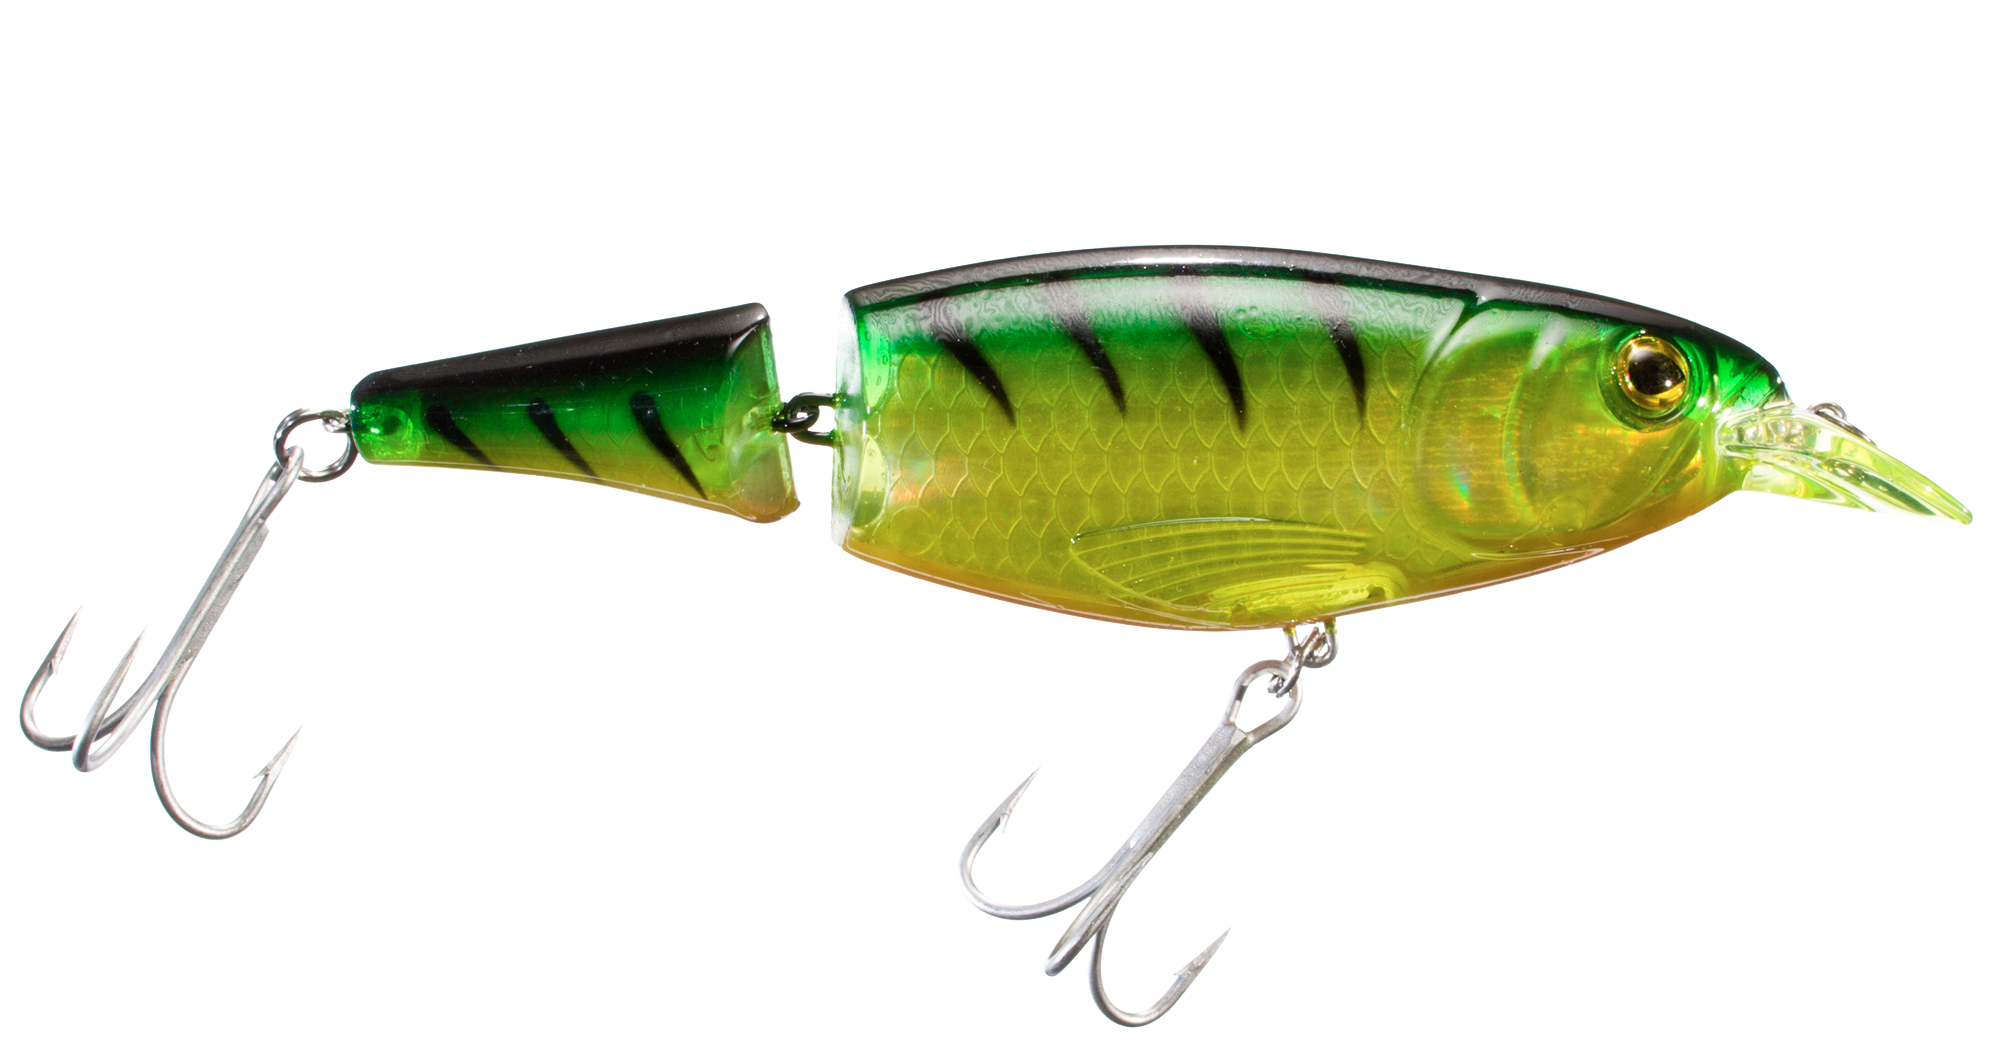 Offshore Angler Jointed Minnow Hard Bait - Firetiger